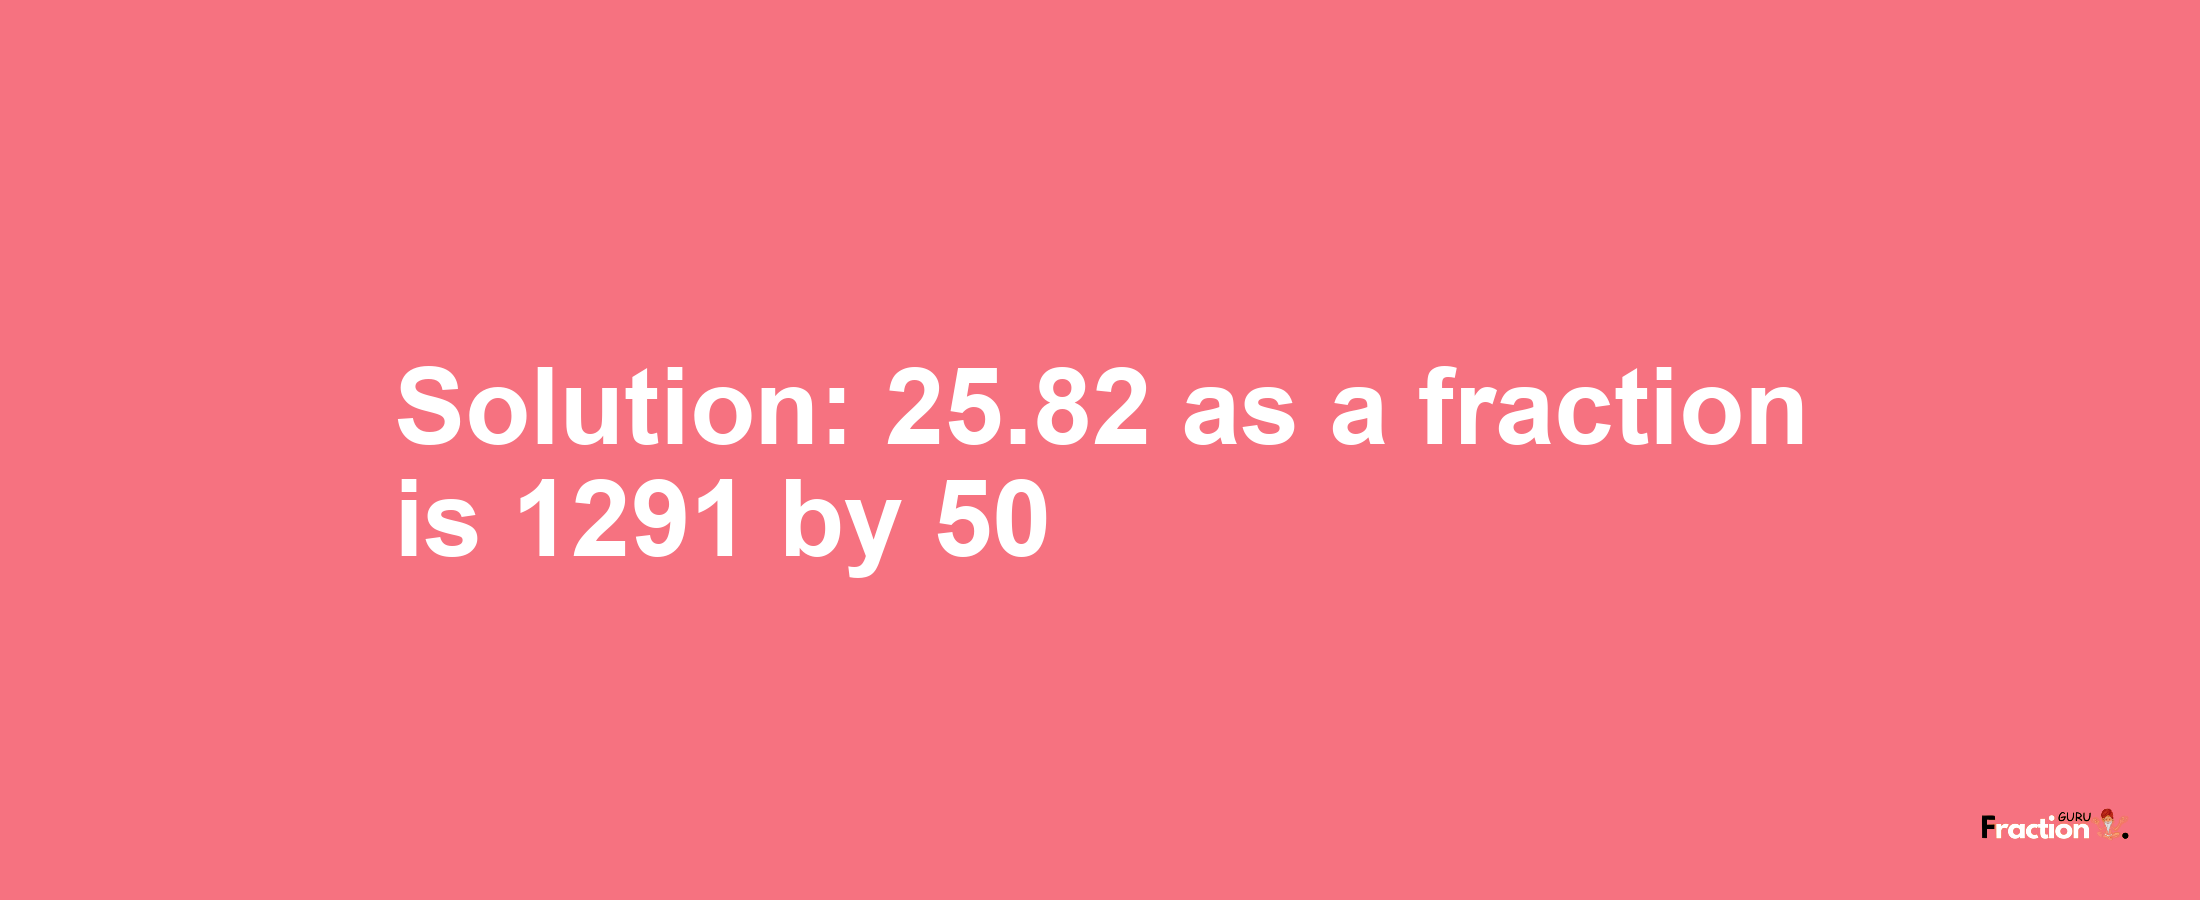 Solution:25.82 as a fraction is 1291/50